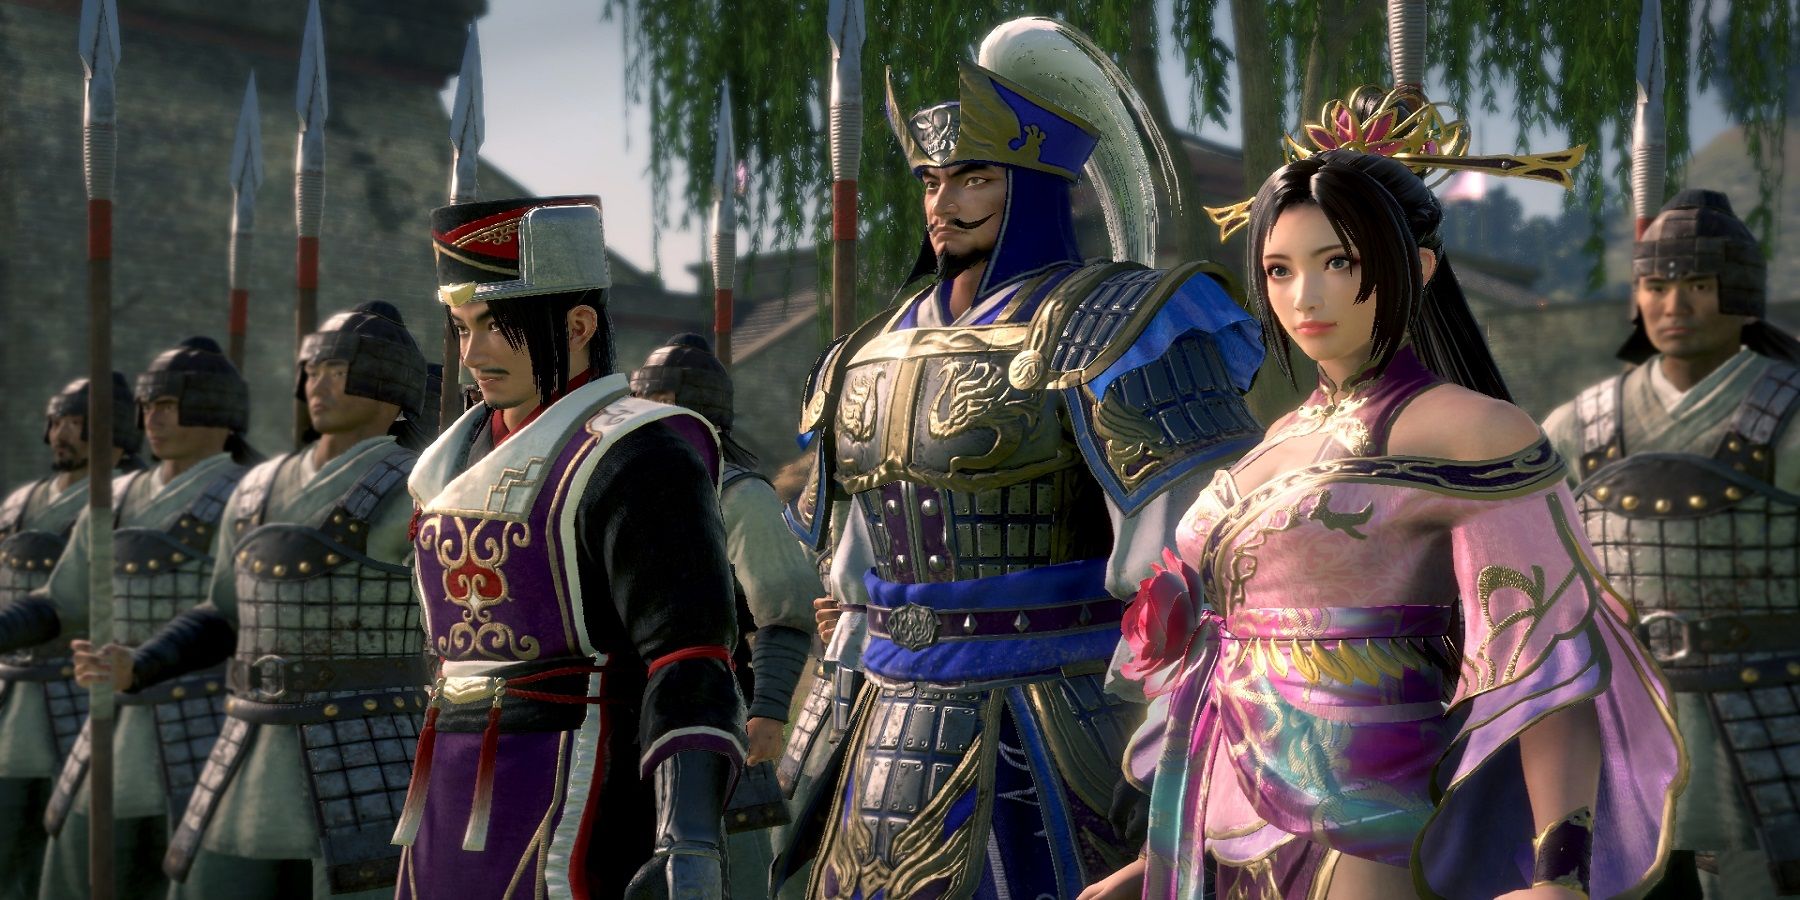 Dynasty Warriors 9 Empires is set to release in early 2022.